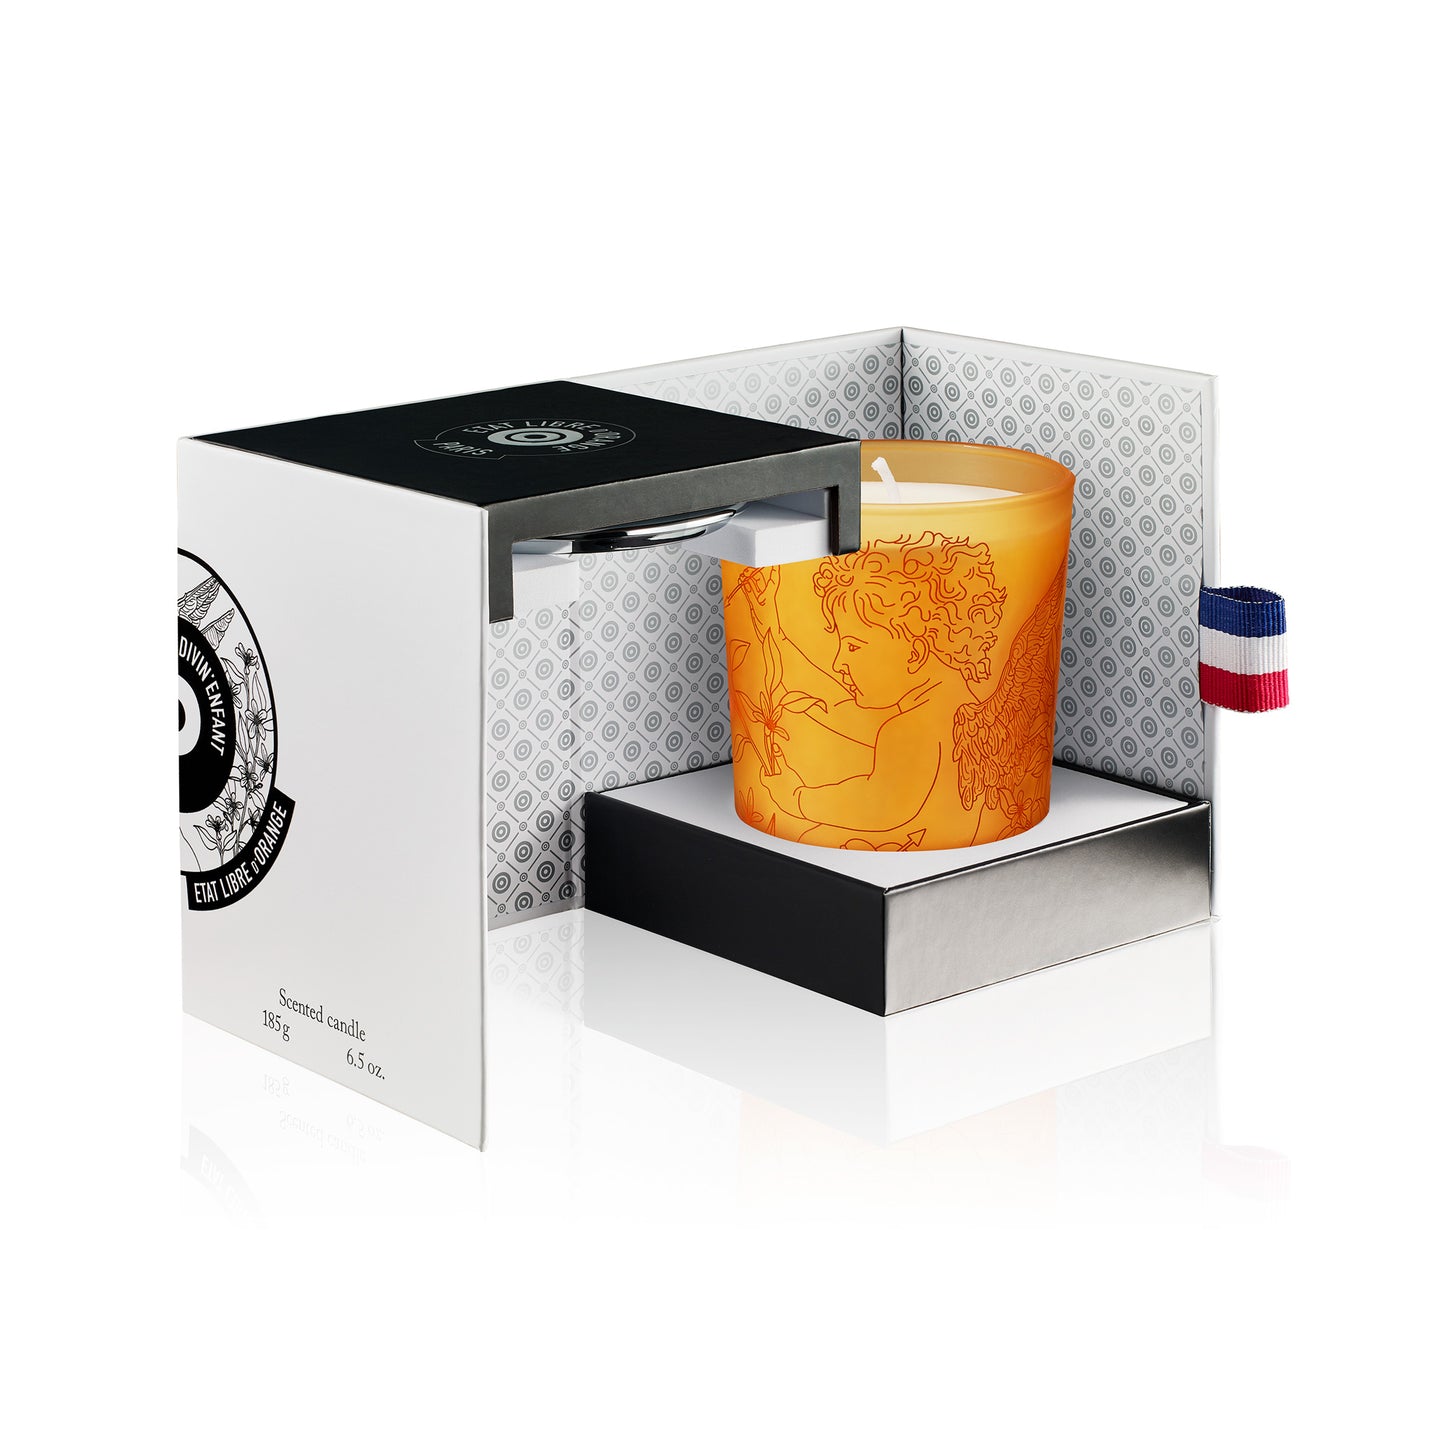 Divin Enfant - Scented candle - Opened box and candle